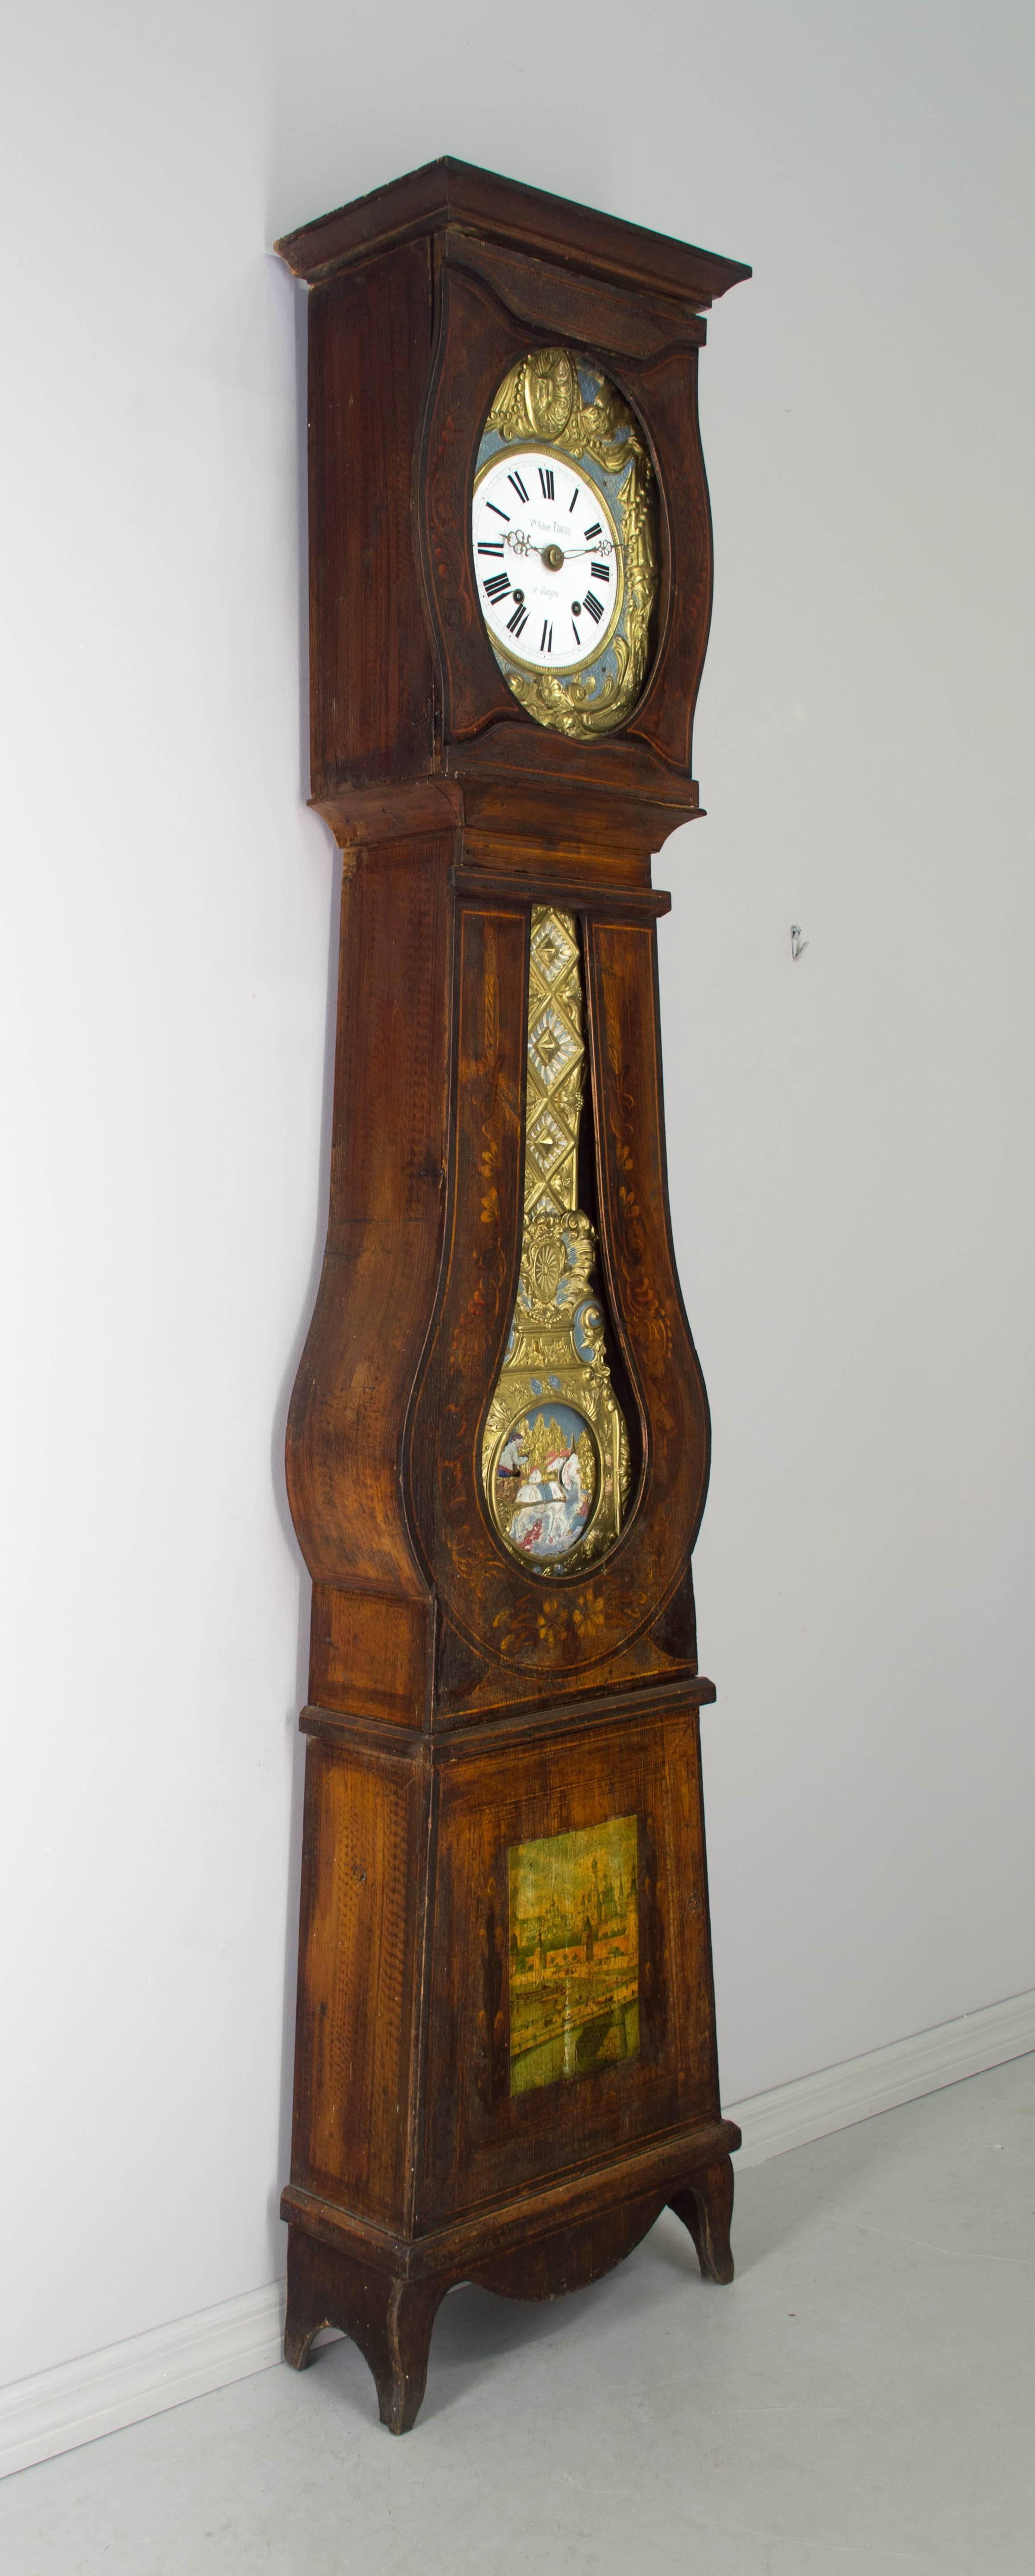 A good comtoise or grandfather clock watch polychrome painted pine case and automated pendulum. Original seven day Morbier movement, cleaned and in working order, having an enamel face, signed by the clockmaker, Hubert Fevrier and the name of his